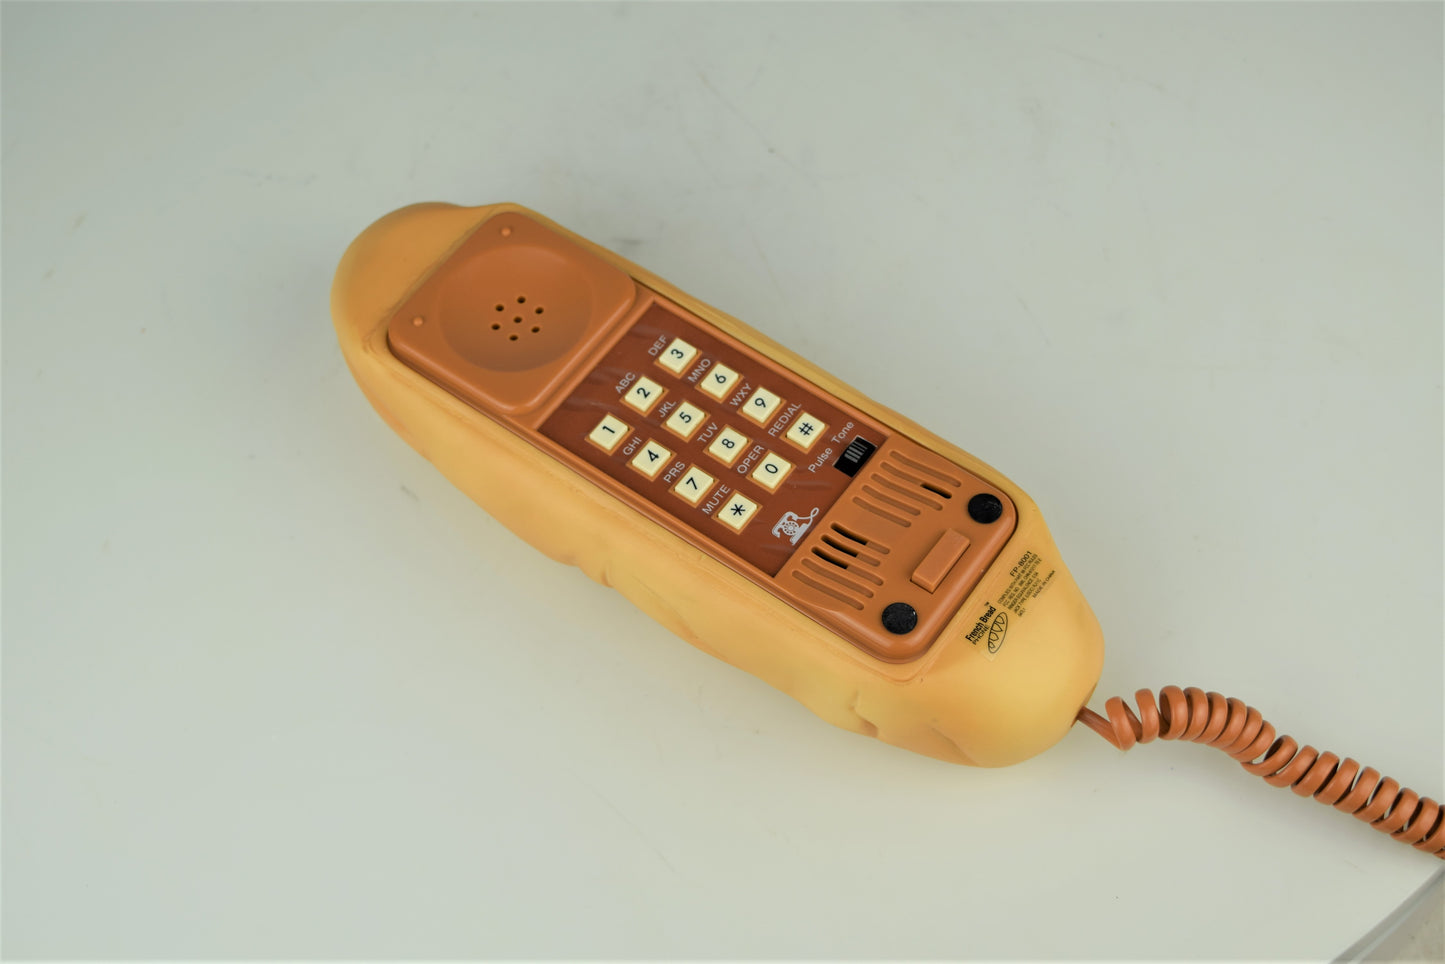 French Baguette Novelty Phone